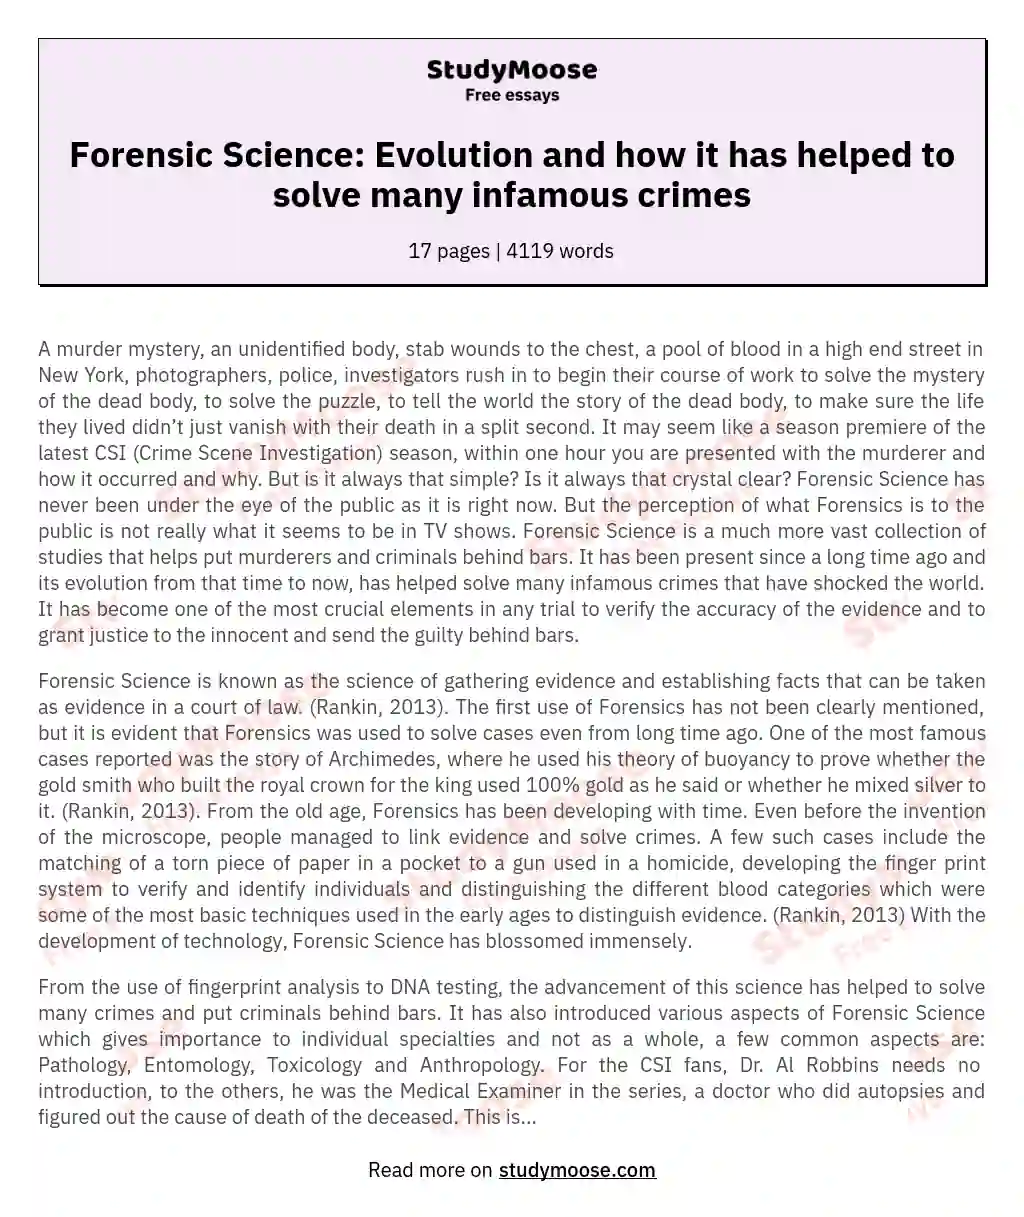 Forensic Science: Evolution and how it has helped to solve many infamous crimes essay